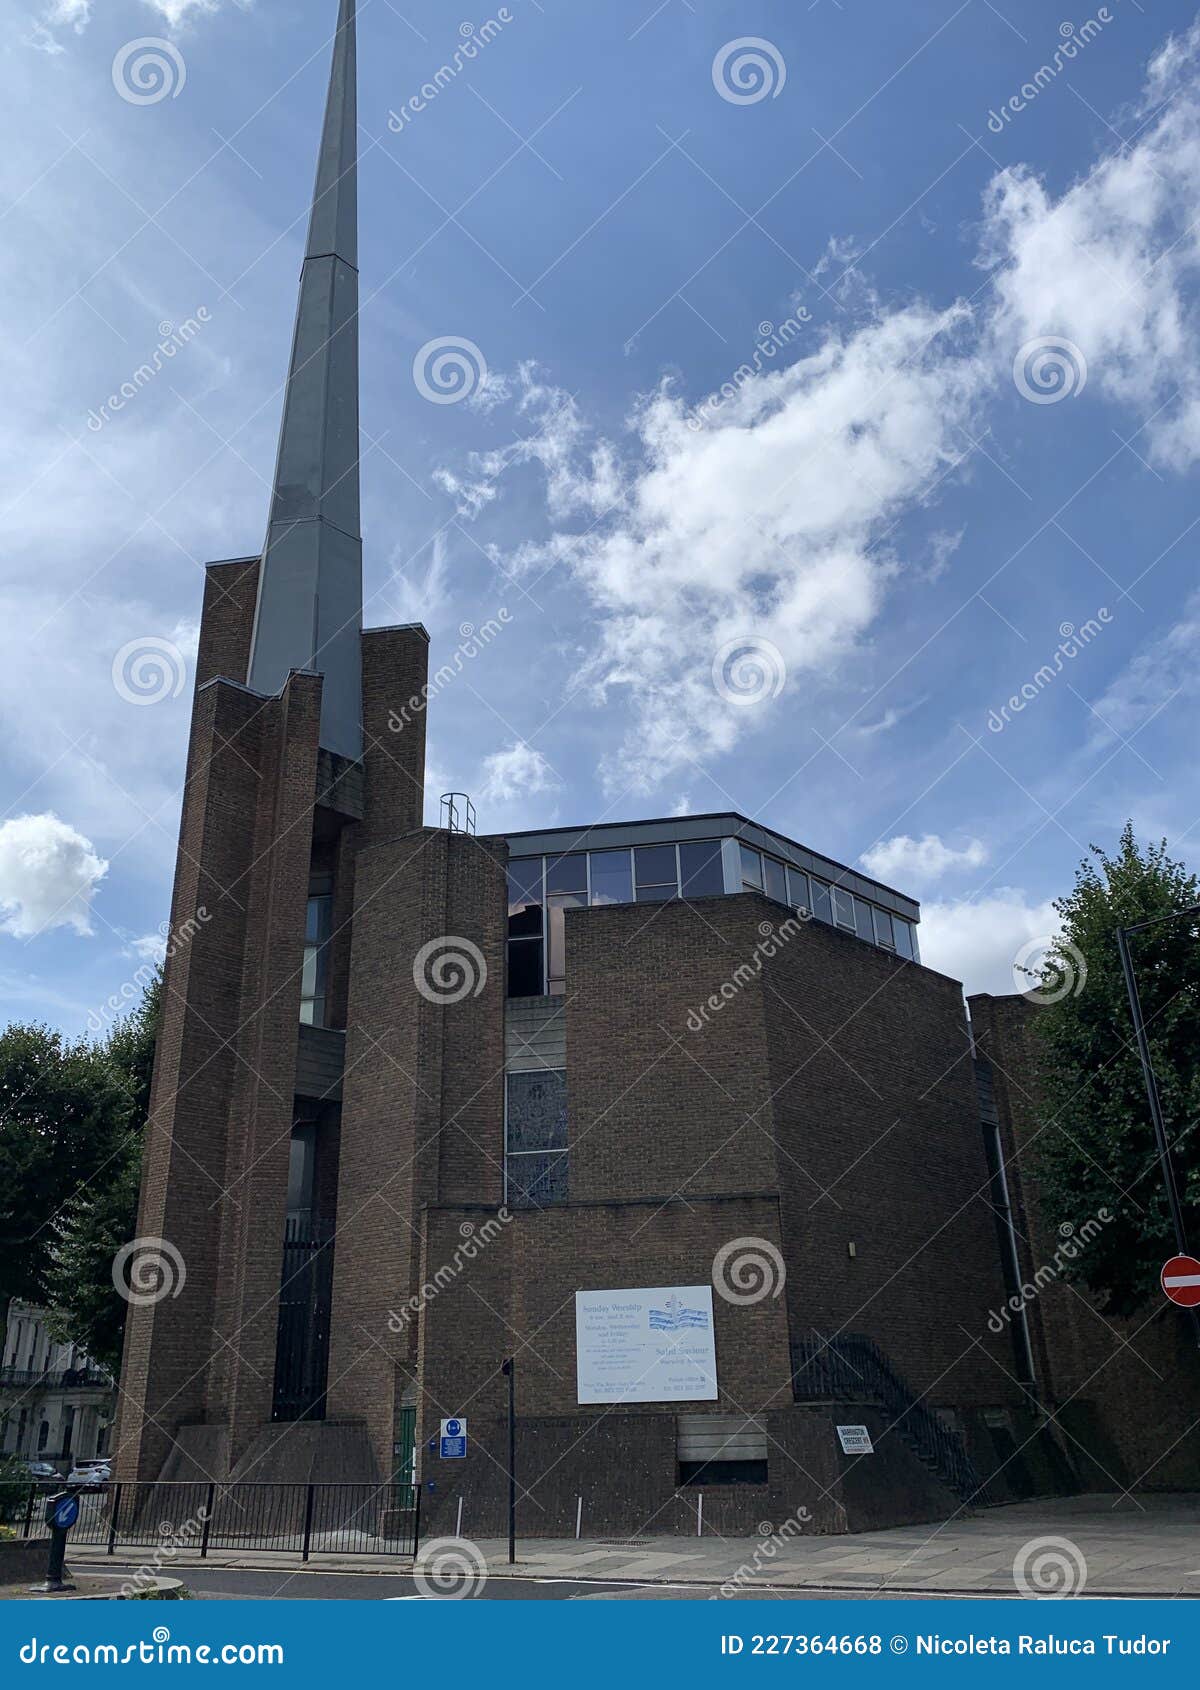 St Saviour's Is A Striking, Angular And Soaring 1976 Brick Church Adjacent To Warwick Avenue Underground Station In London Editorial Stock Photo - Image Of Flats, England: 227364668